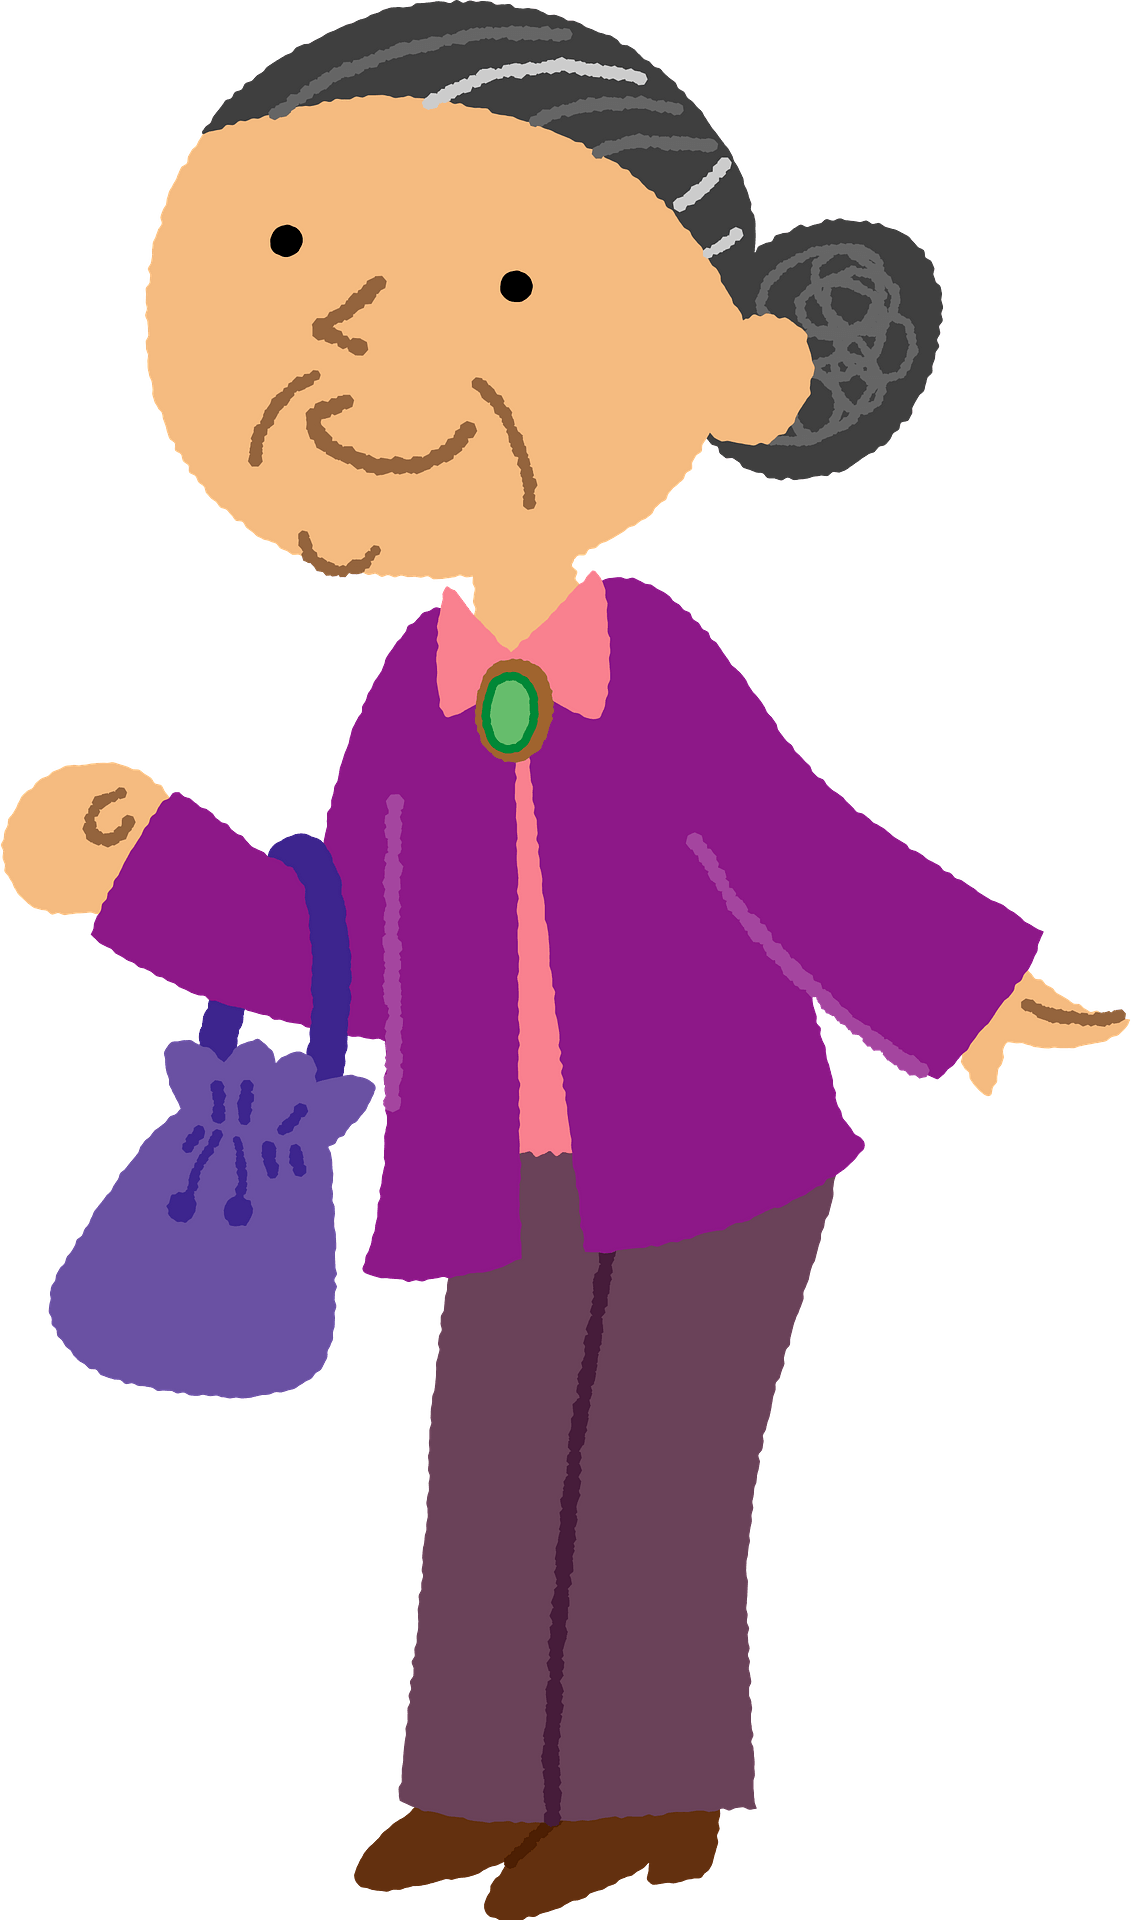 610-older-women-empowerment-illustrations-royalty-free-vector-clip-art-library